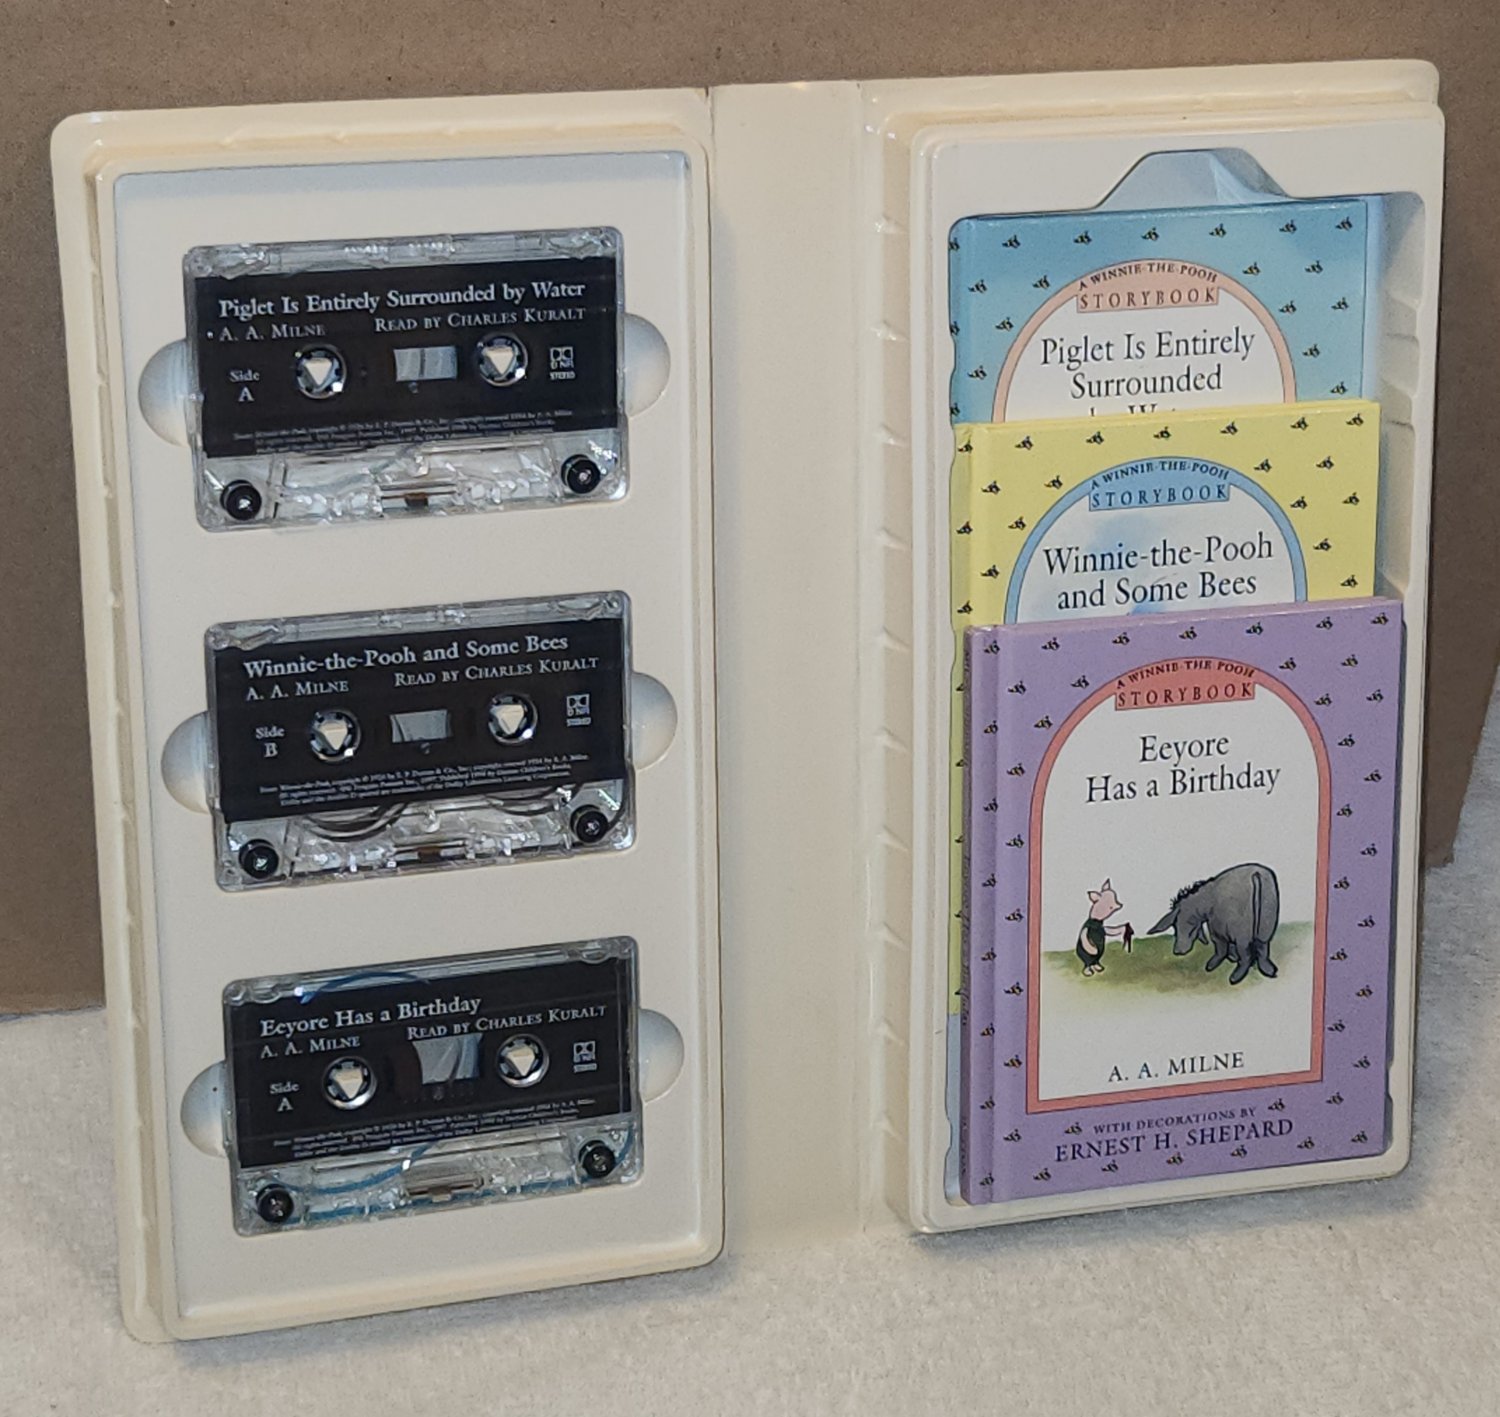 Winnie the Pooh Read Aloud Collection Volume One Cassette Tapes Hardcover Books 1998